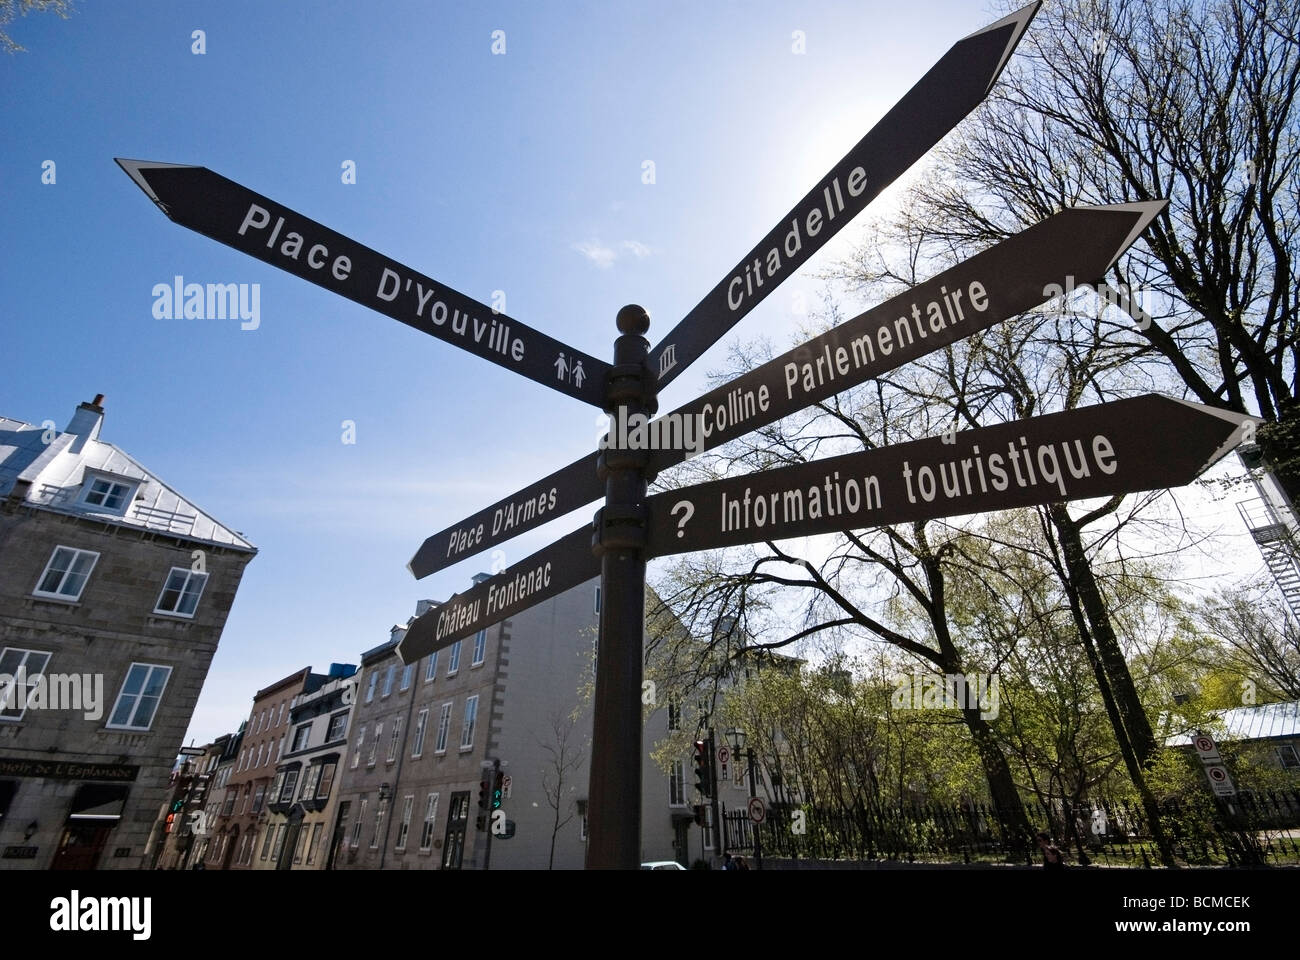 Street signs in old town of Quebec City, Canada. Stock Photo